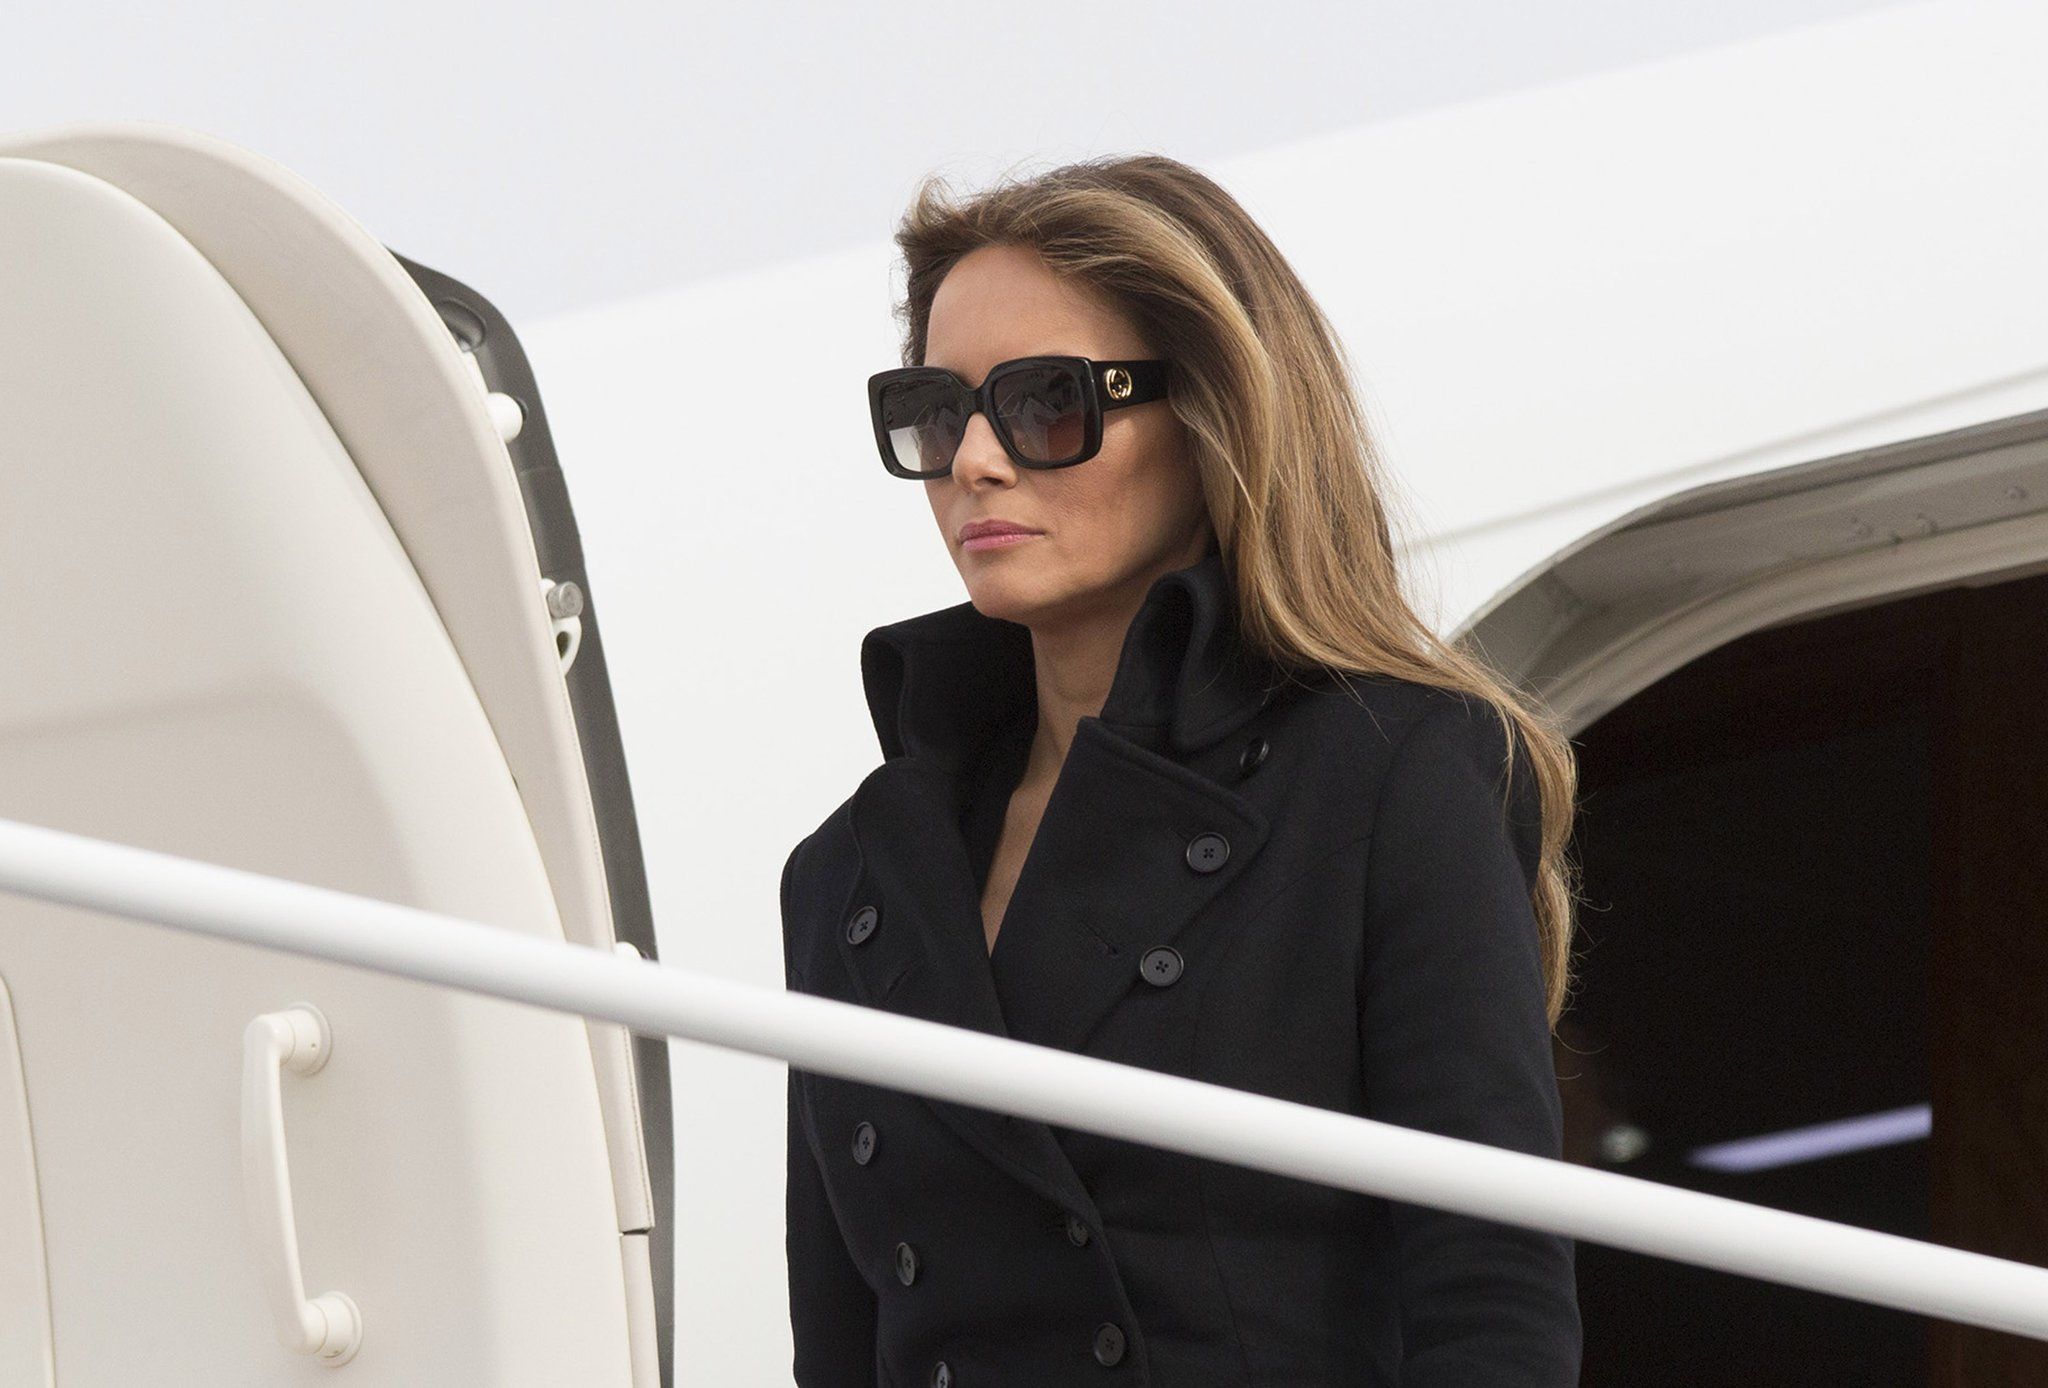 Many are ridiculed, this is the story behind some of Melania Trump's controversial outfits